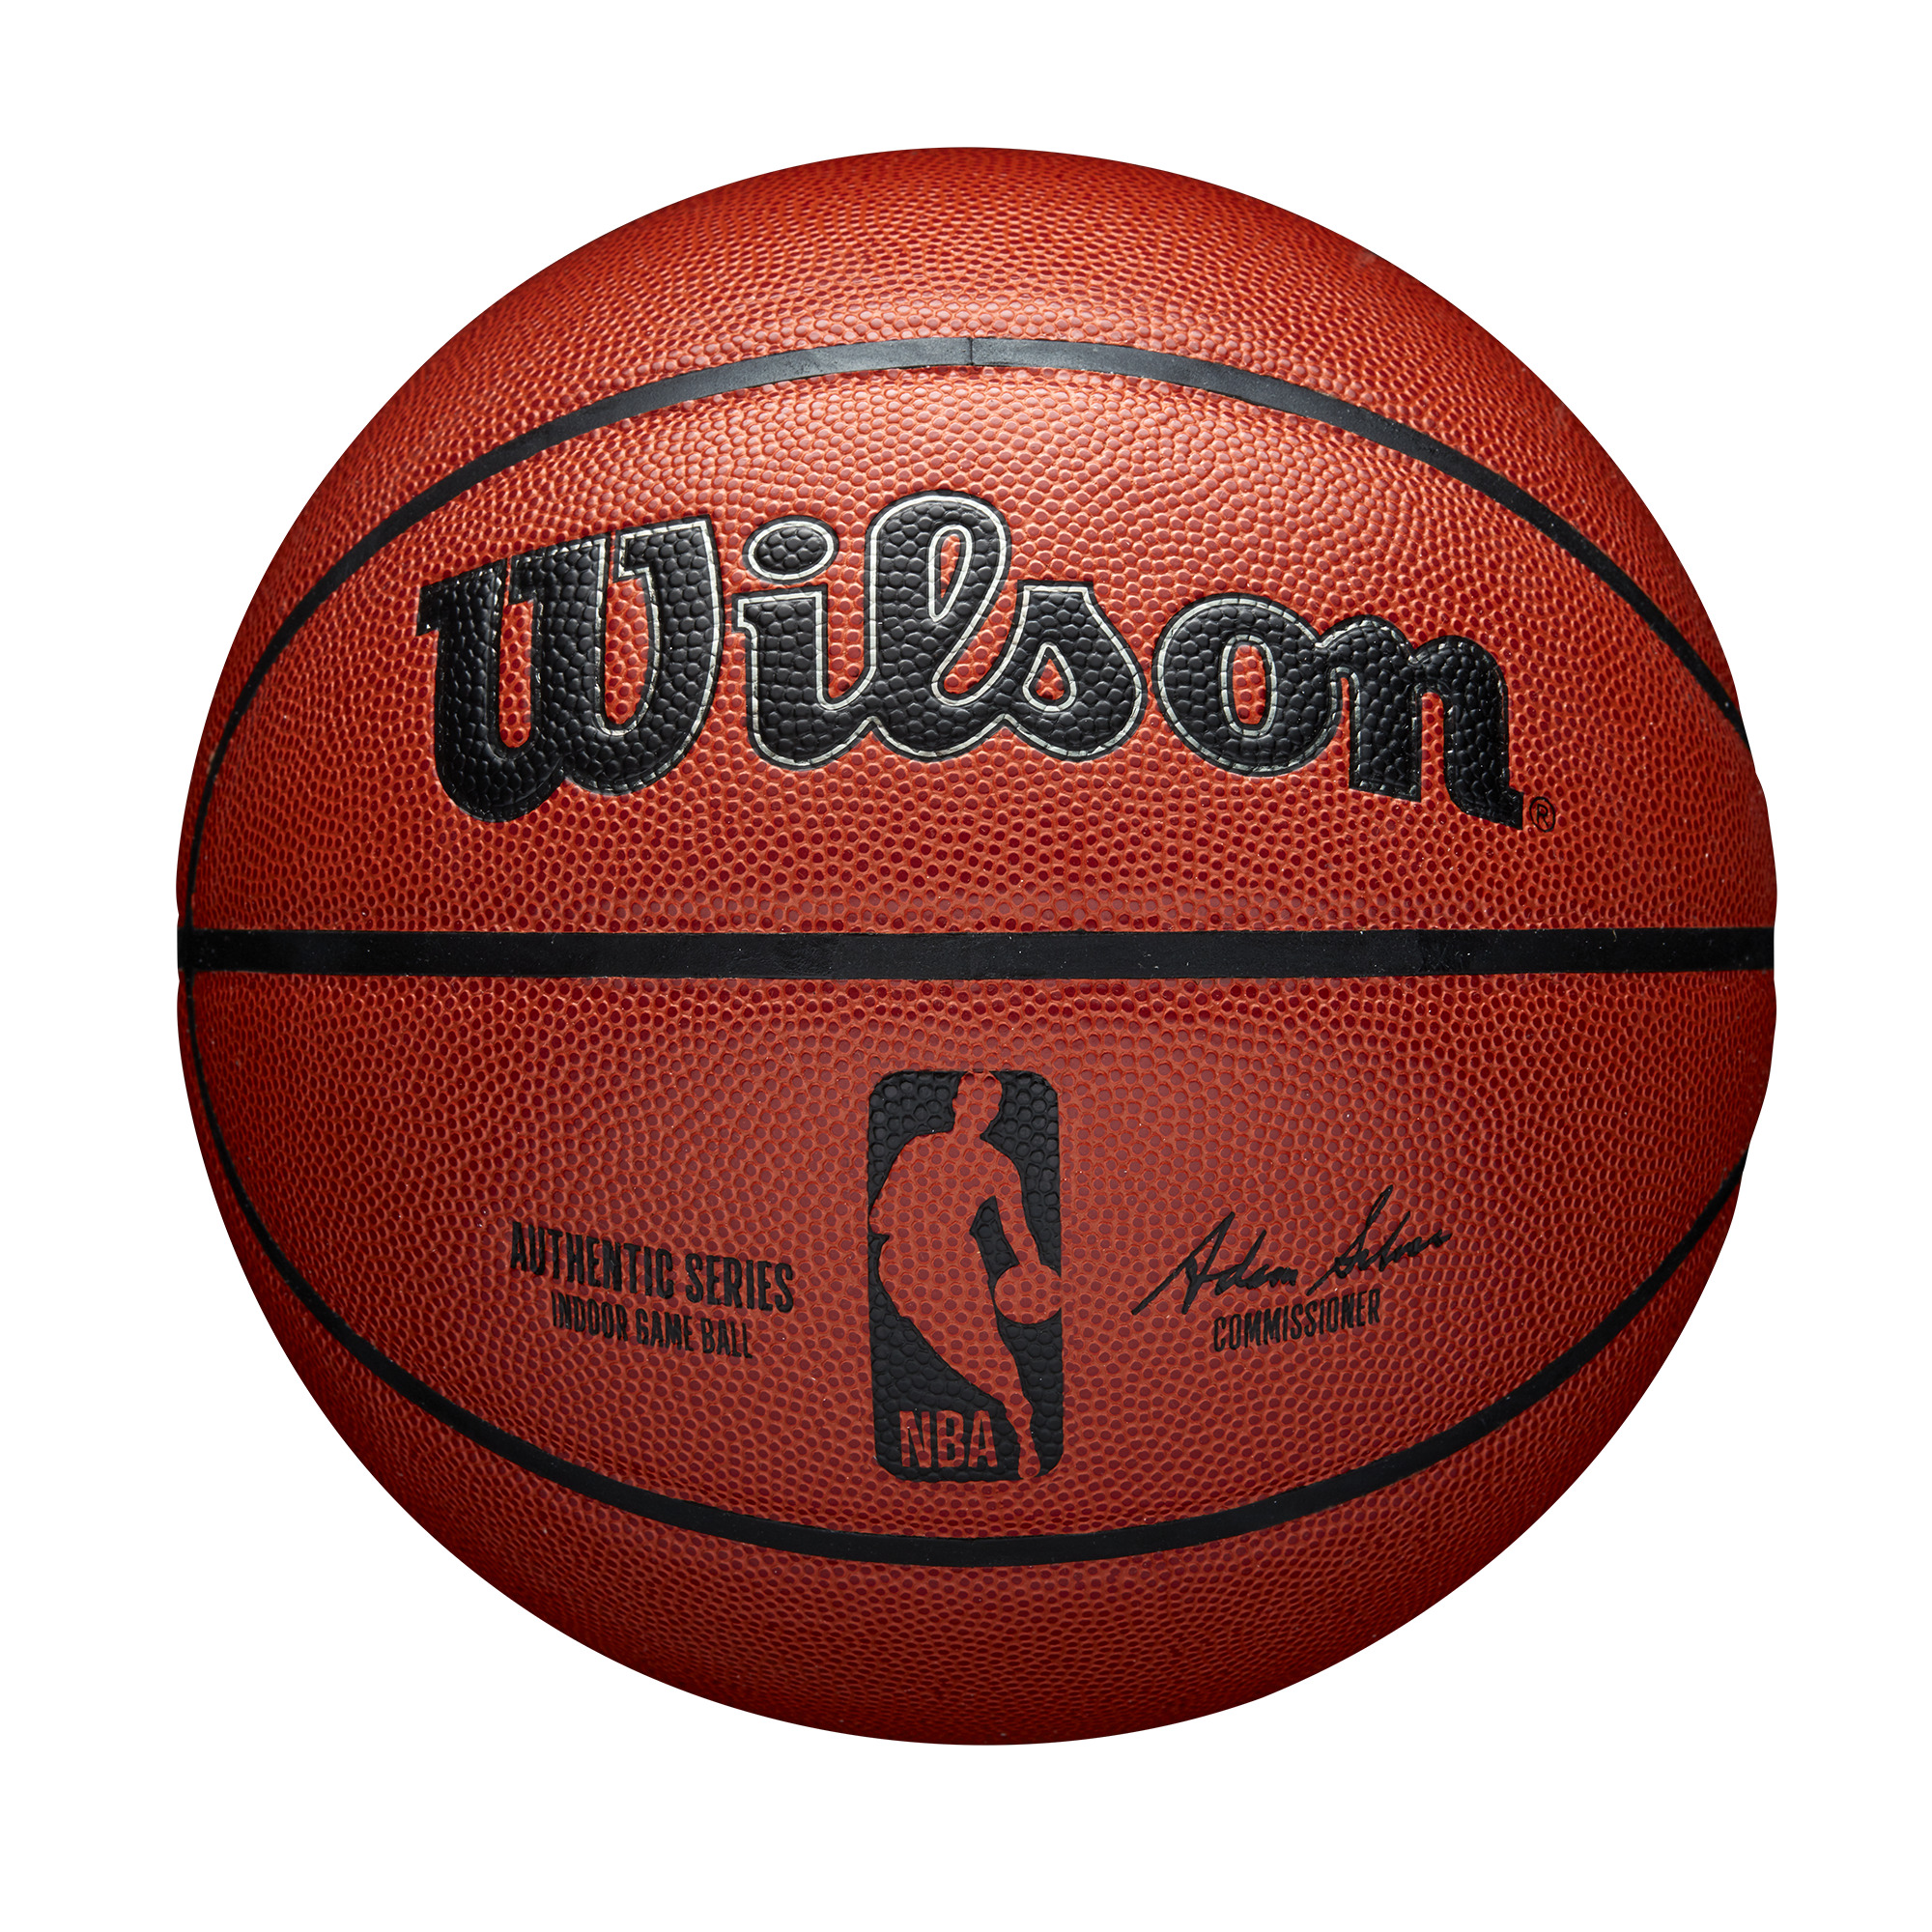 Wilson NBA Authentic Indoor Competition Basketball, Brown, 29.5 in. - image 1 of 6